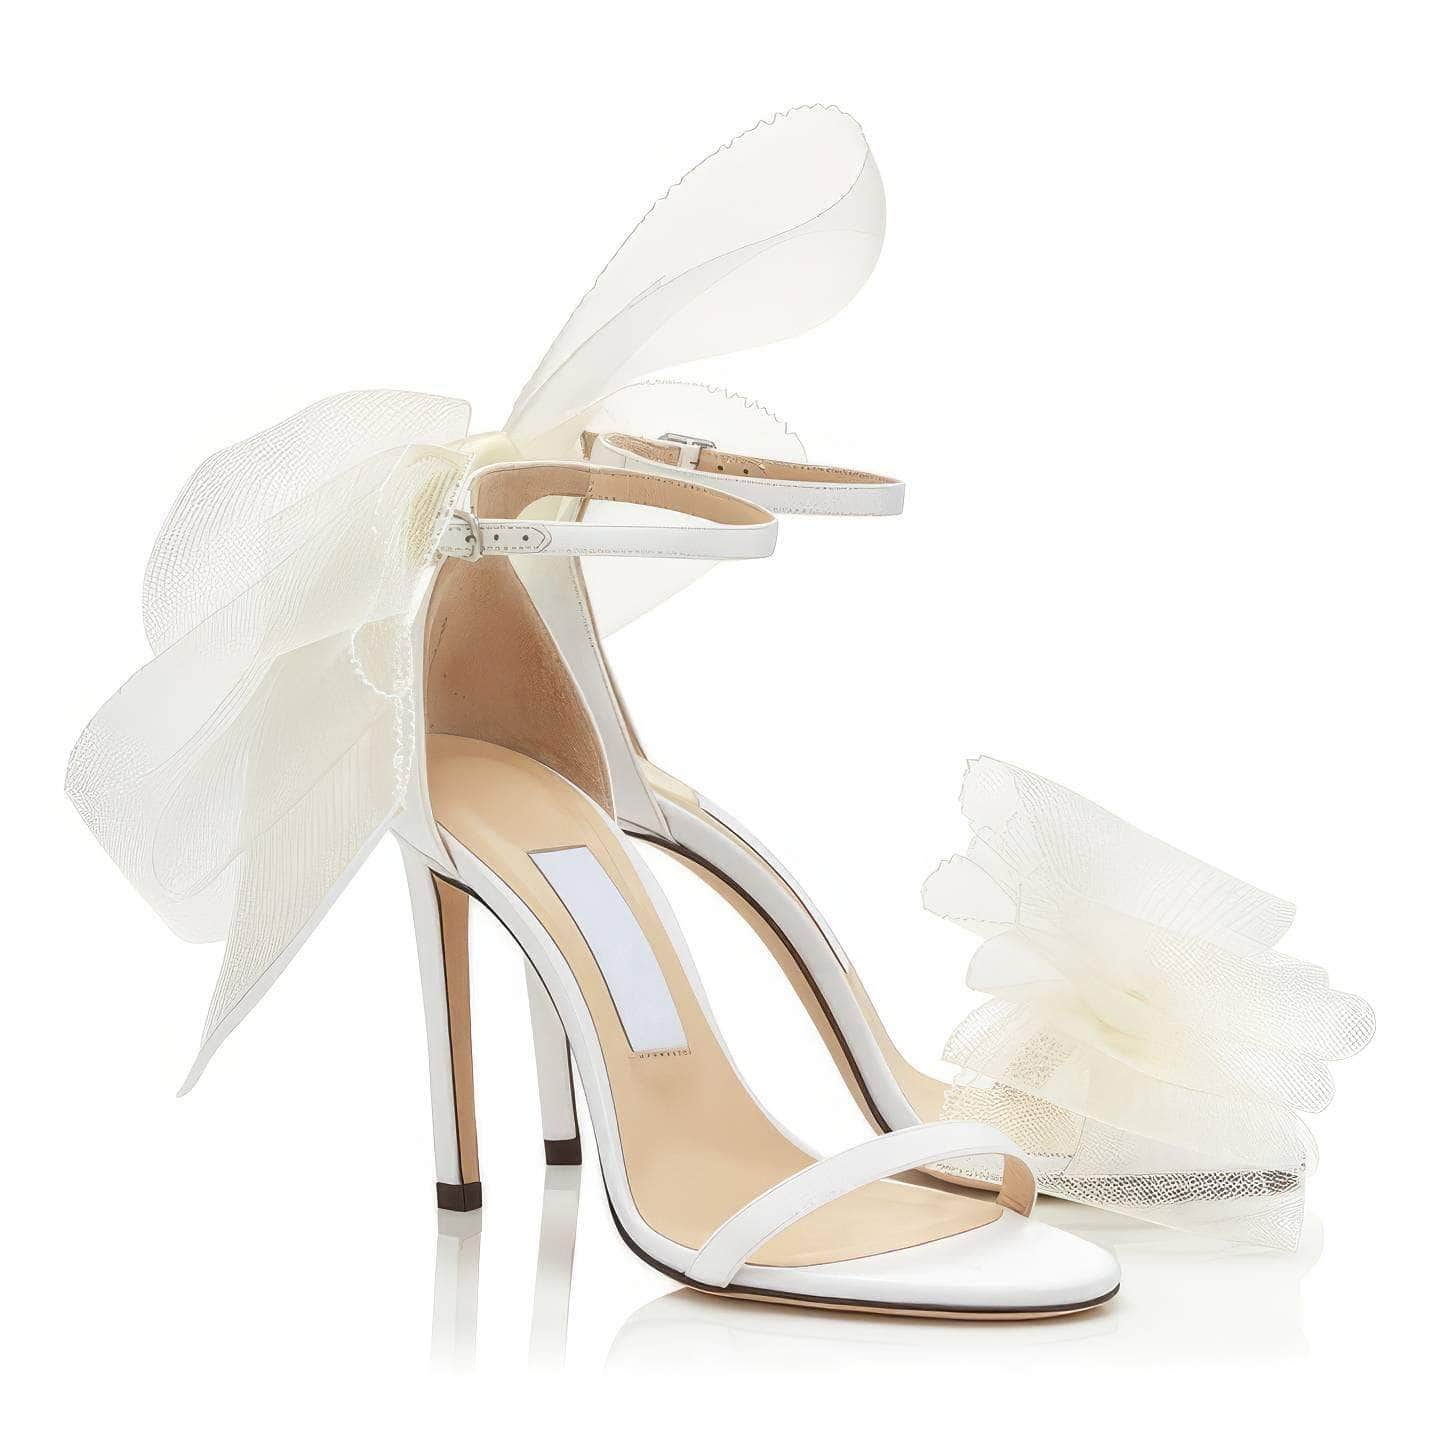 Butterfly Thin Strap Heeled Sandals